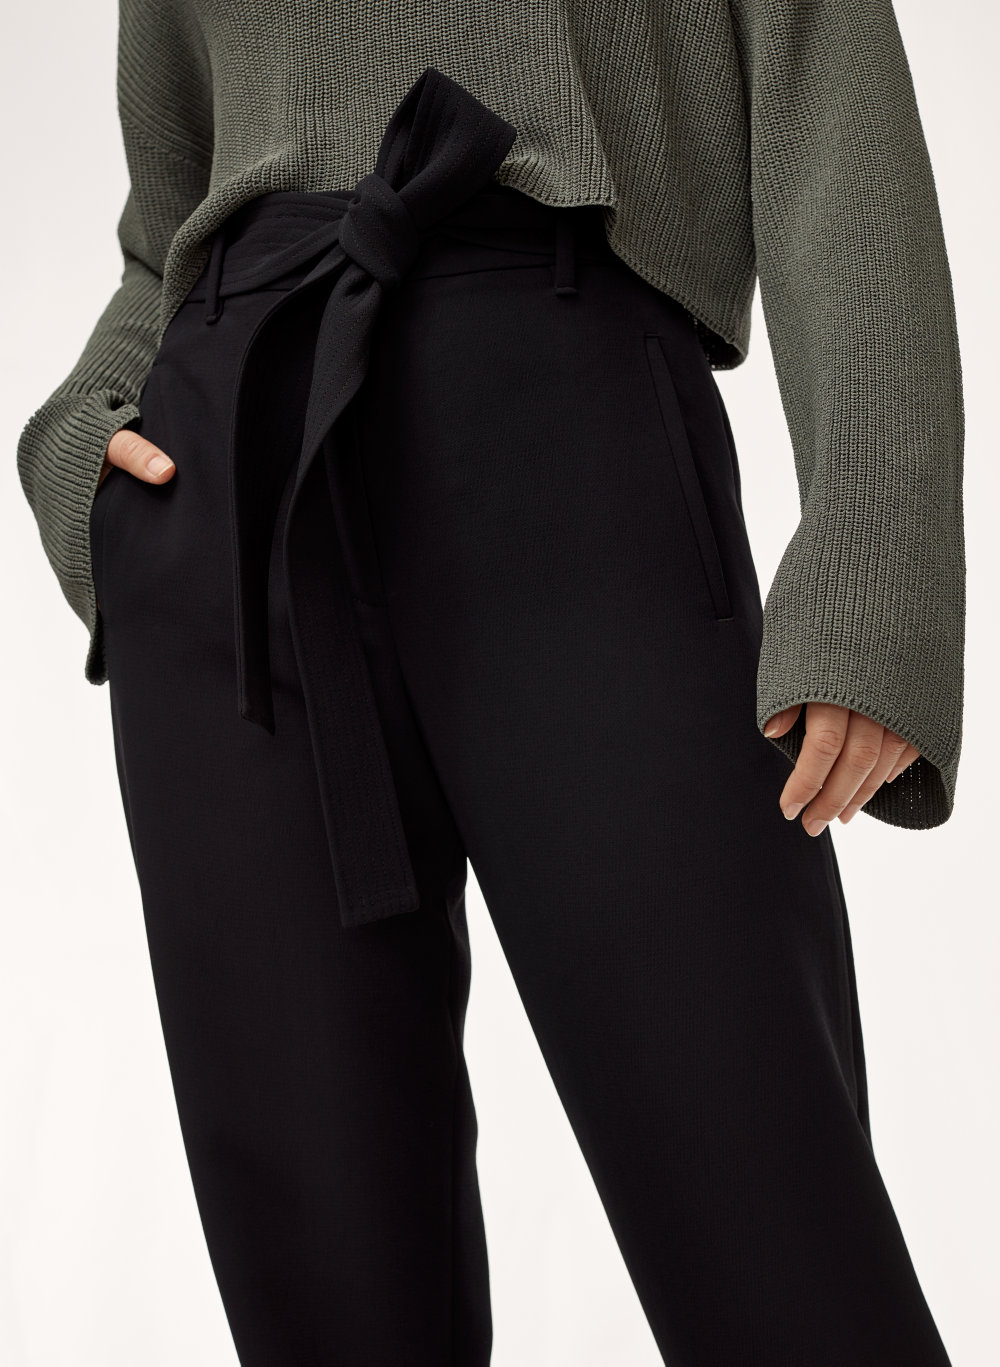 high waisted dress pants with tie